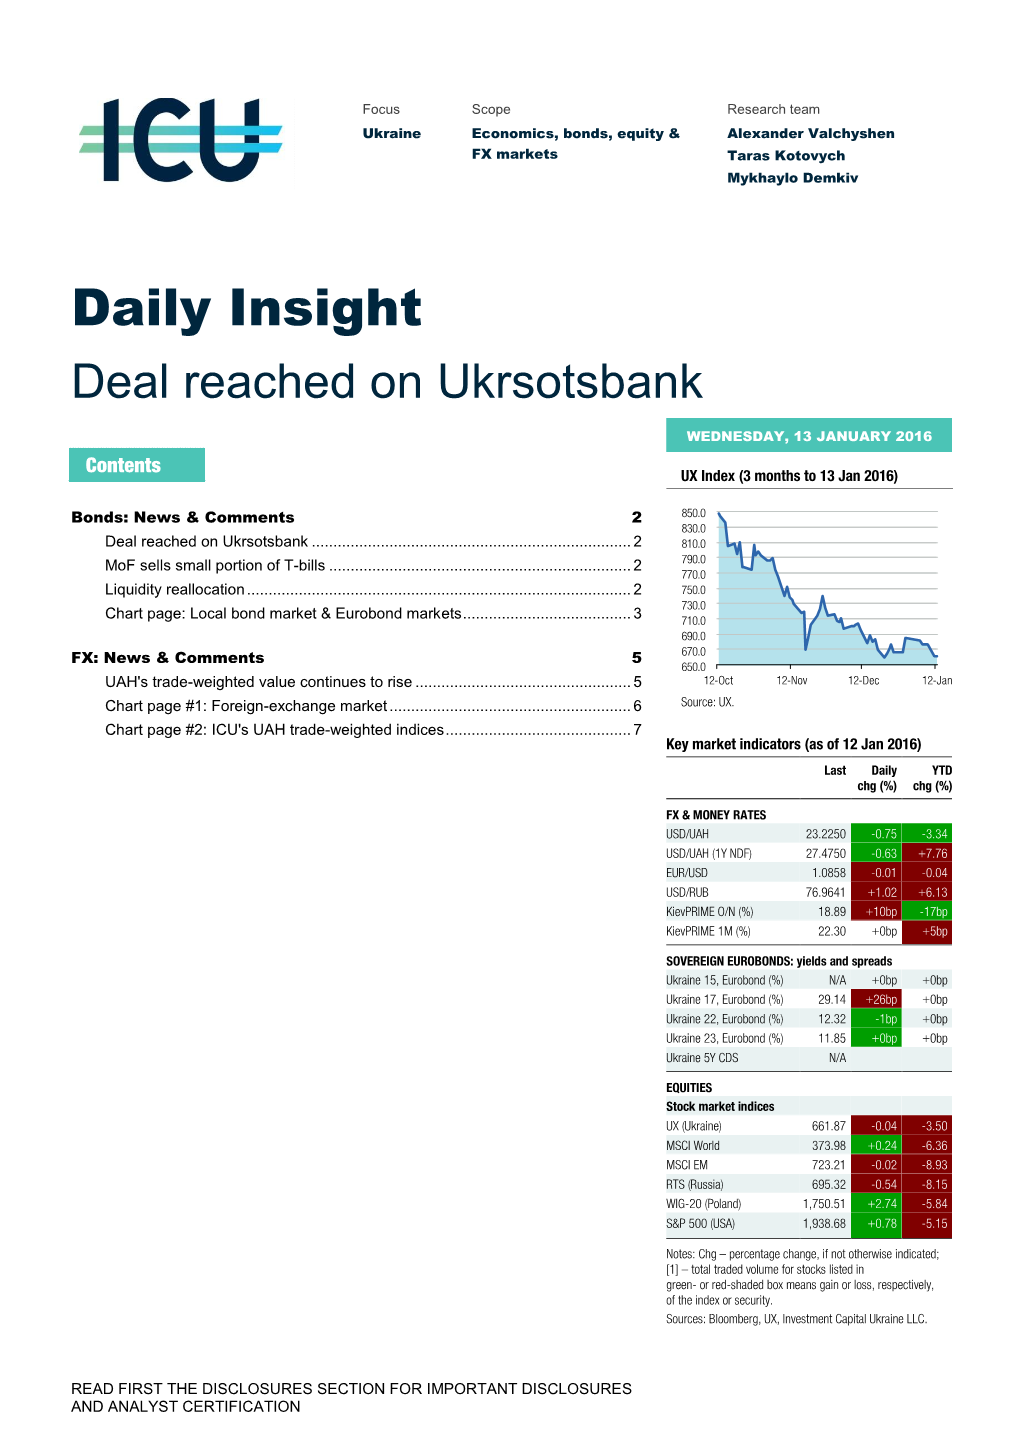 Daily Insight Deal Reached on Ukrsotsbank